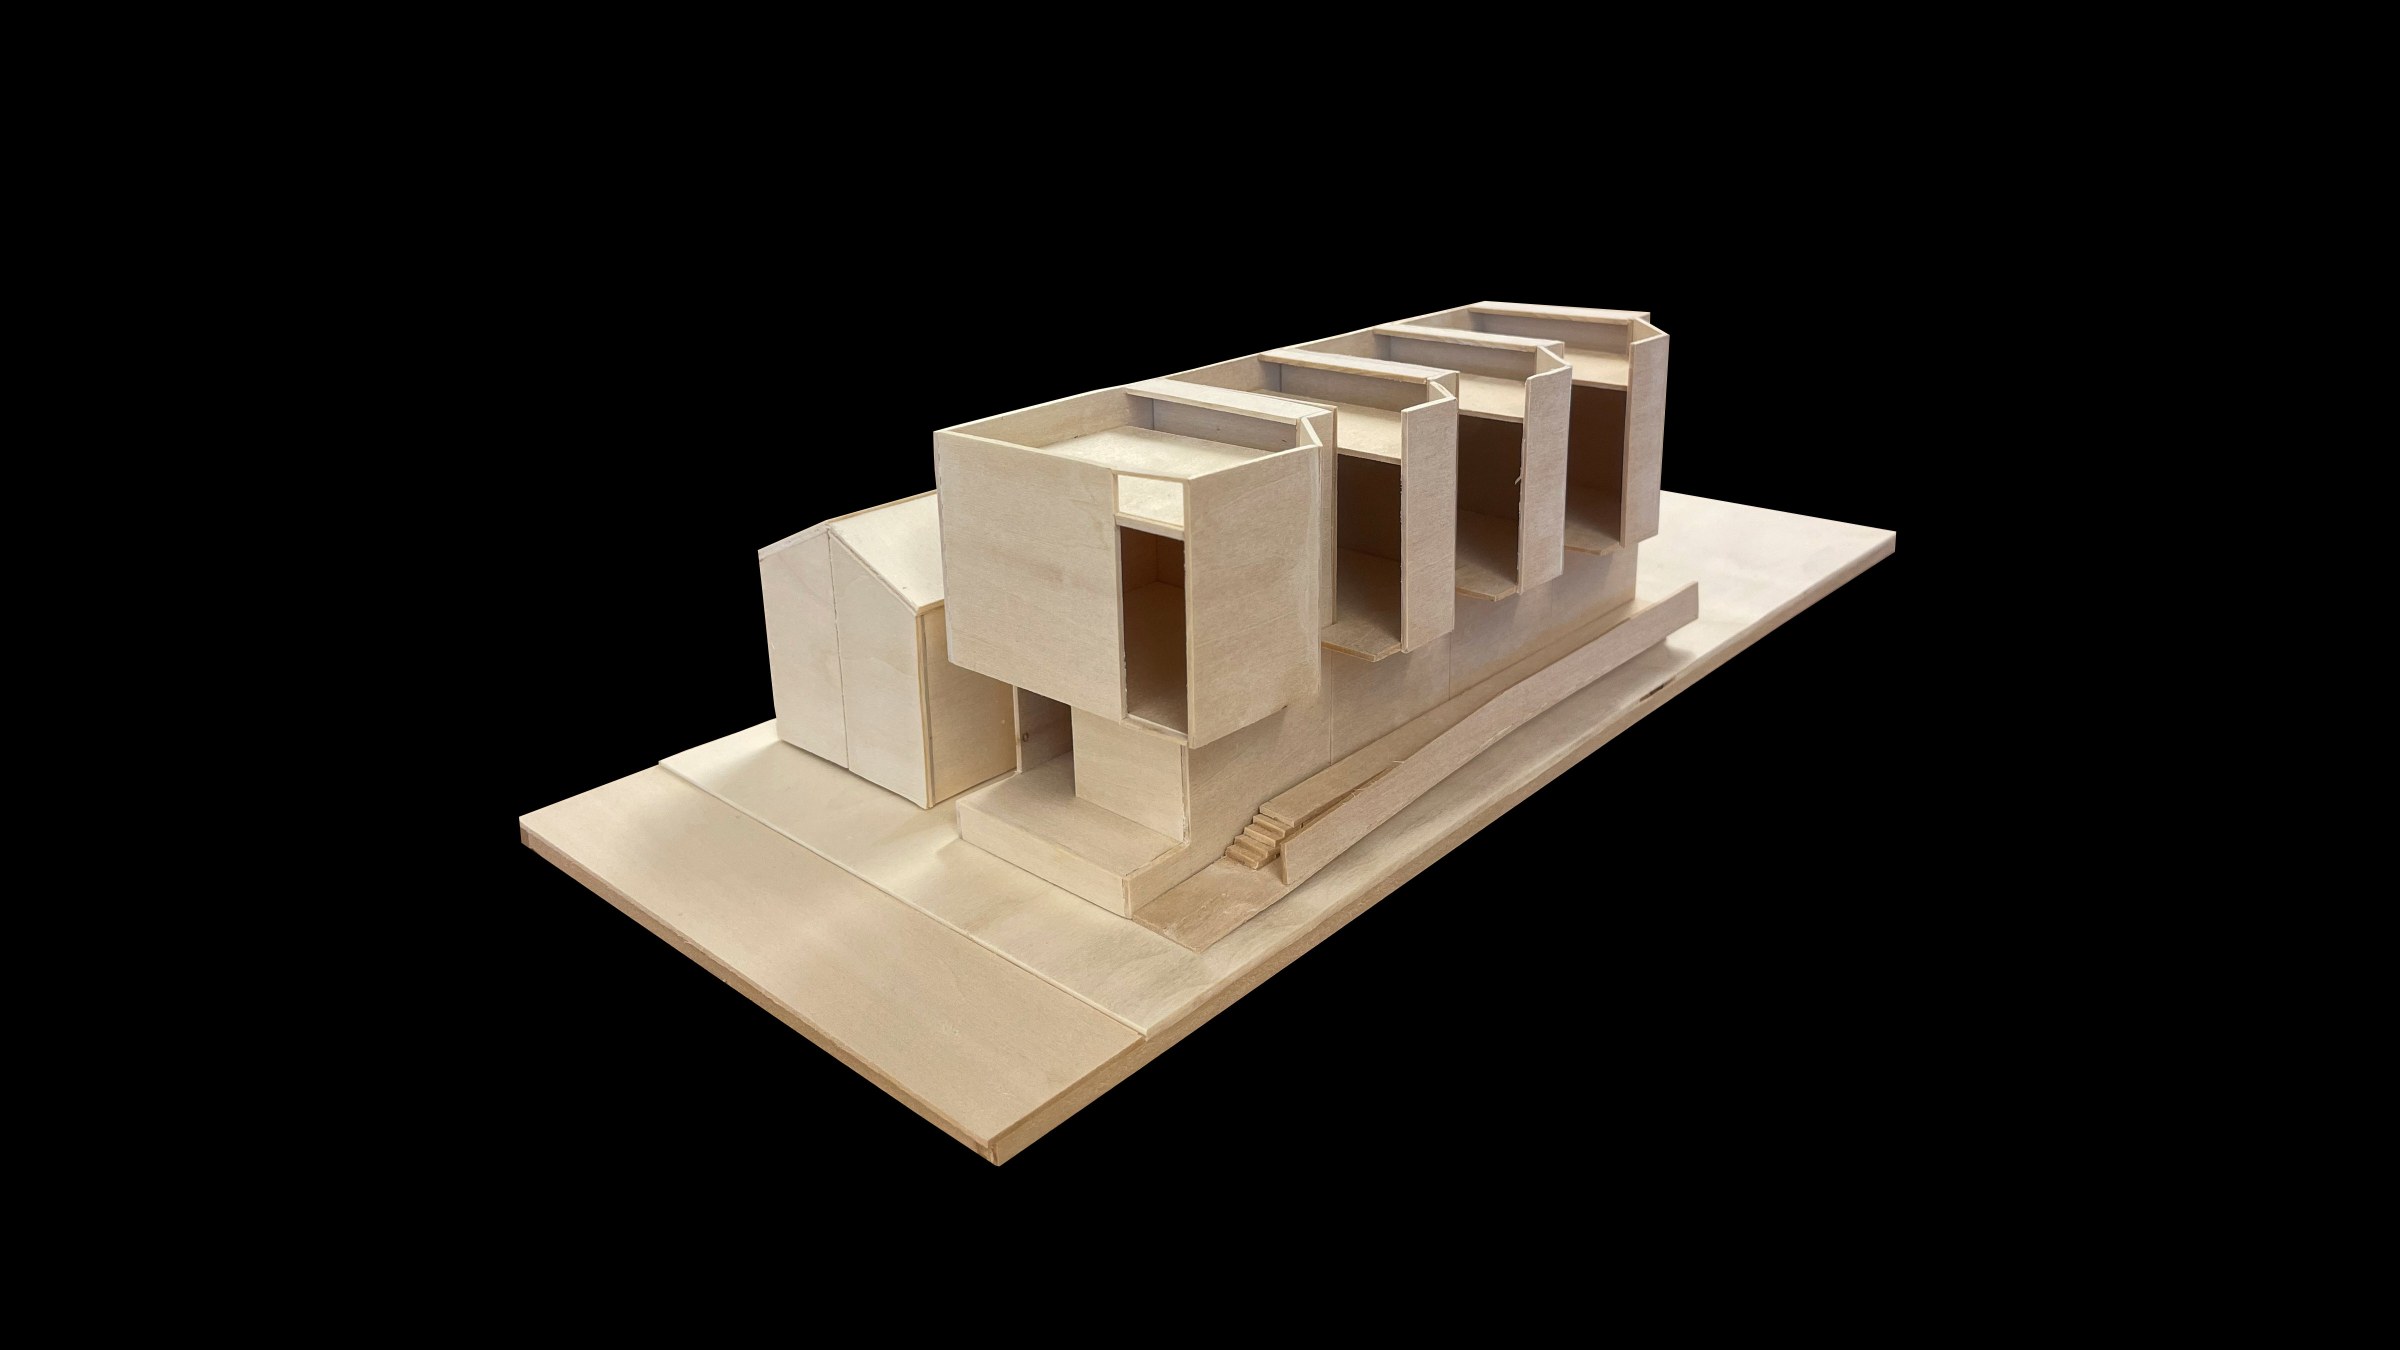 Daniel Tighe's thesis project: built model 2